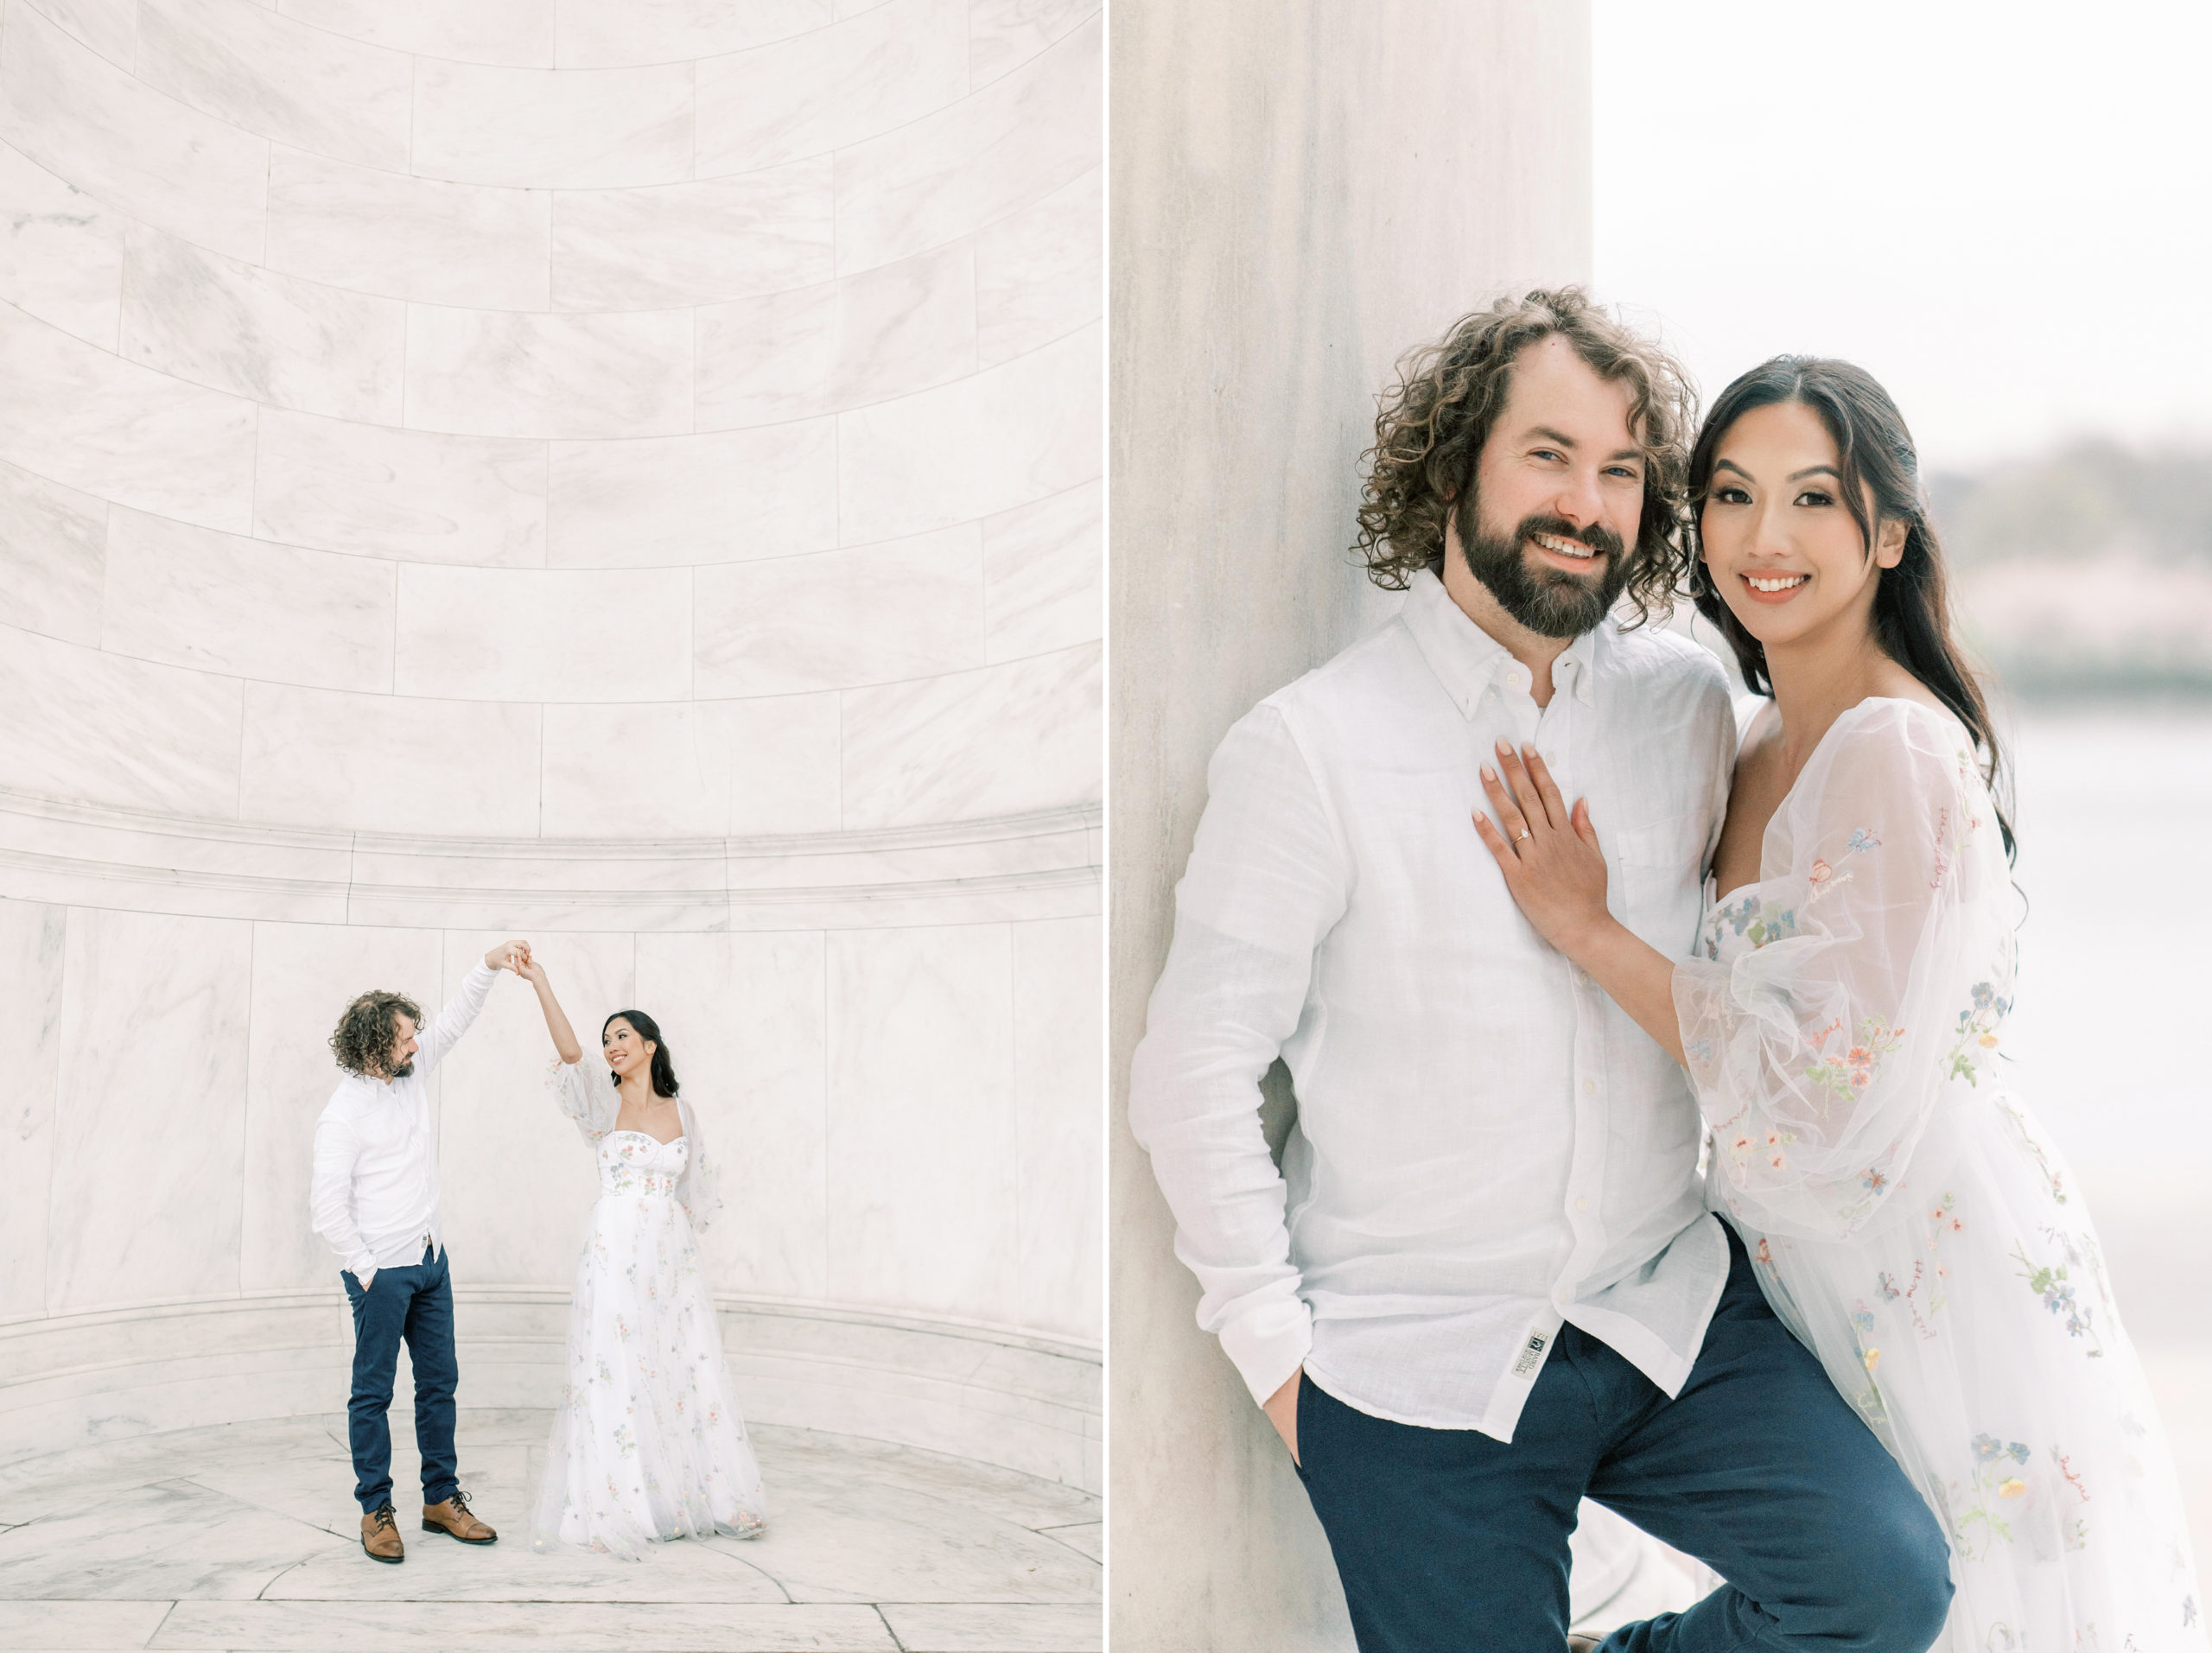 A traditional Cherry Blossom Engagement Session in Washington, DC featuring portraits at the Tidal Basin and Jefferson Memorial.